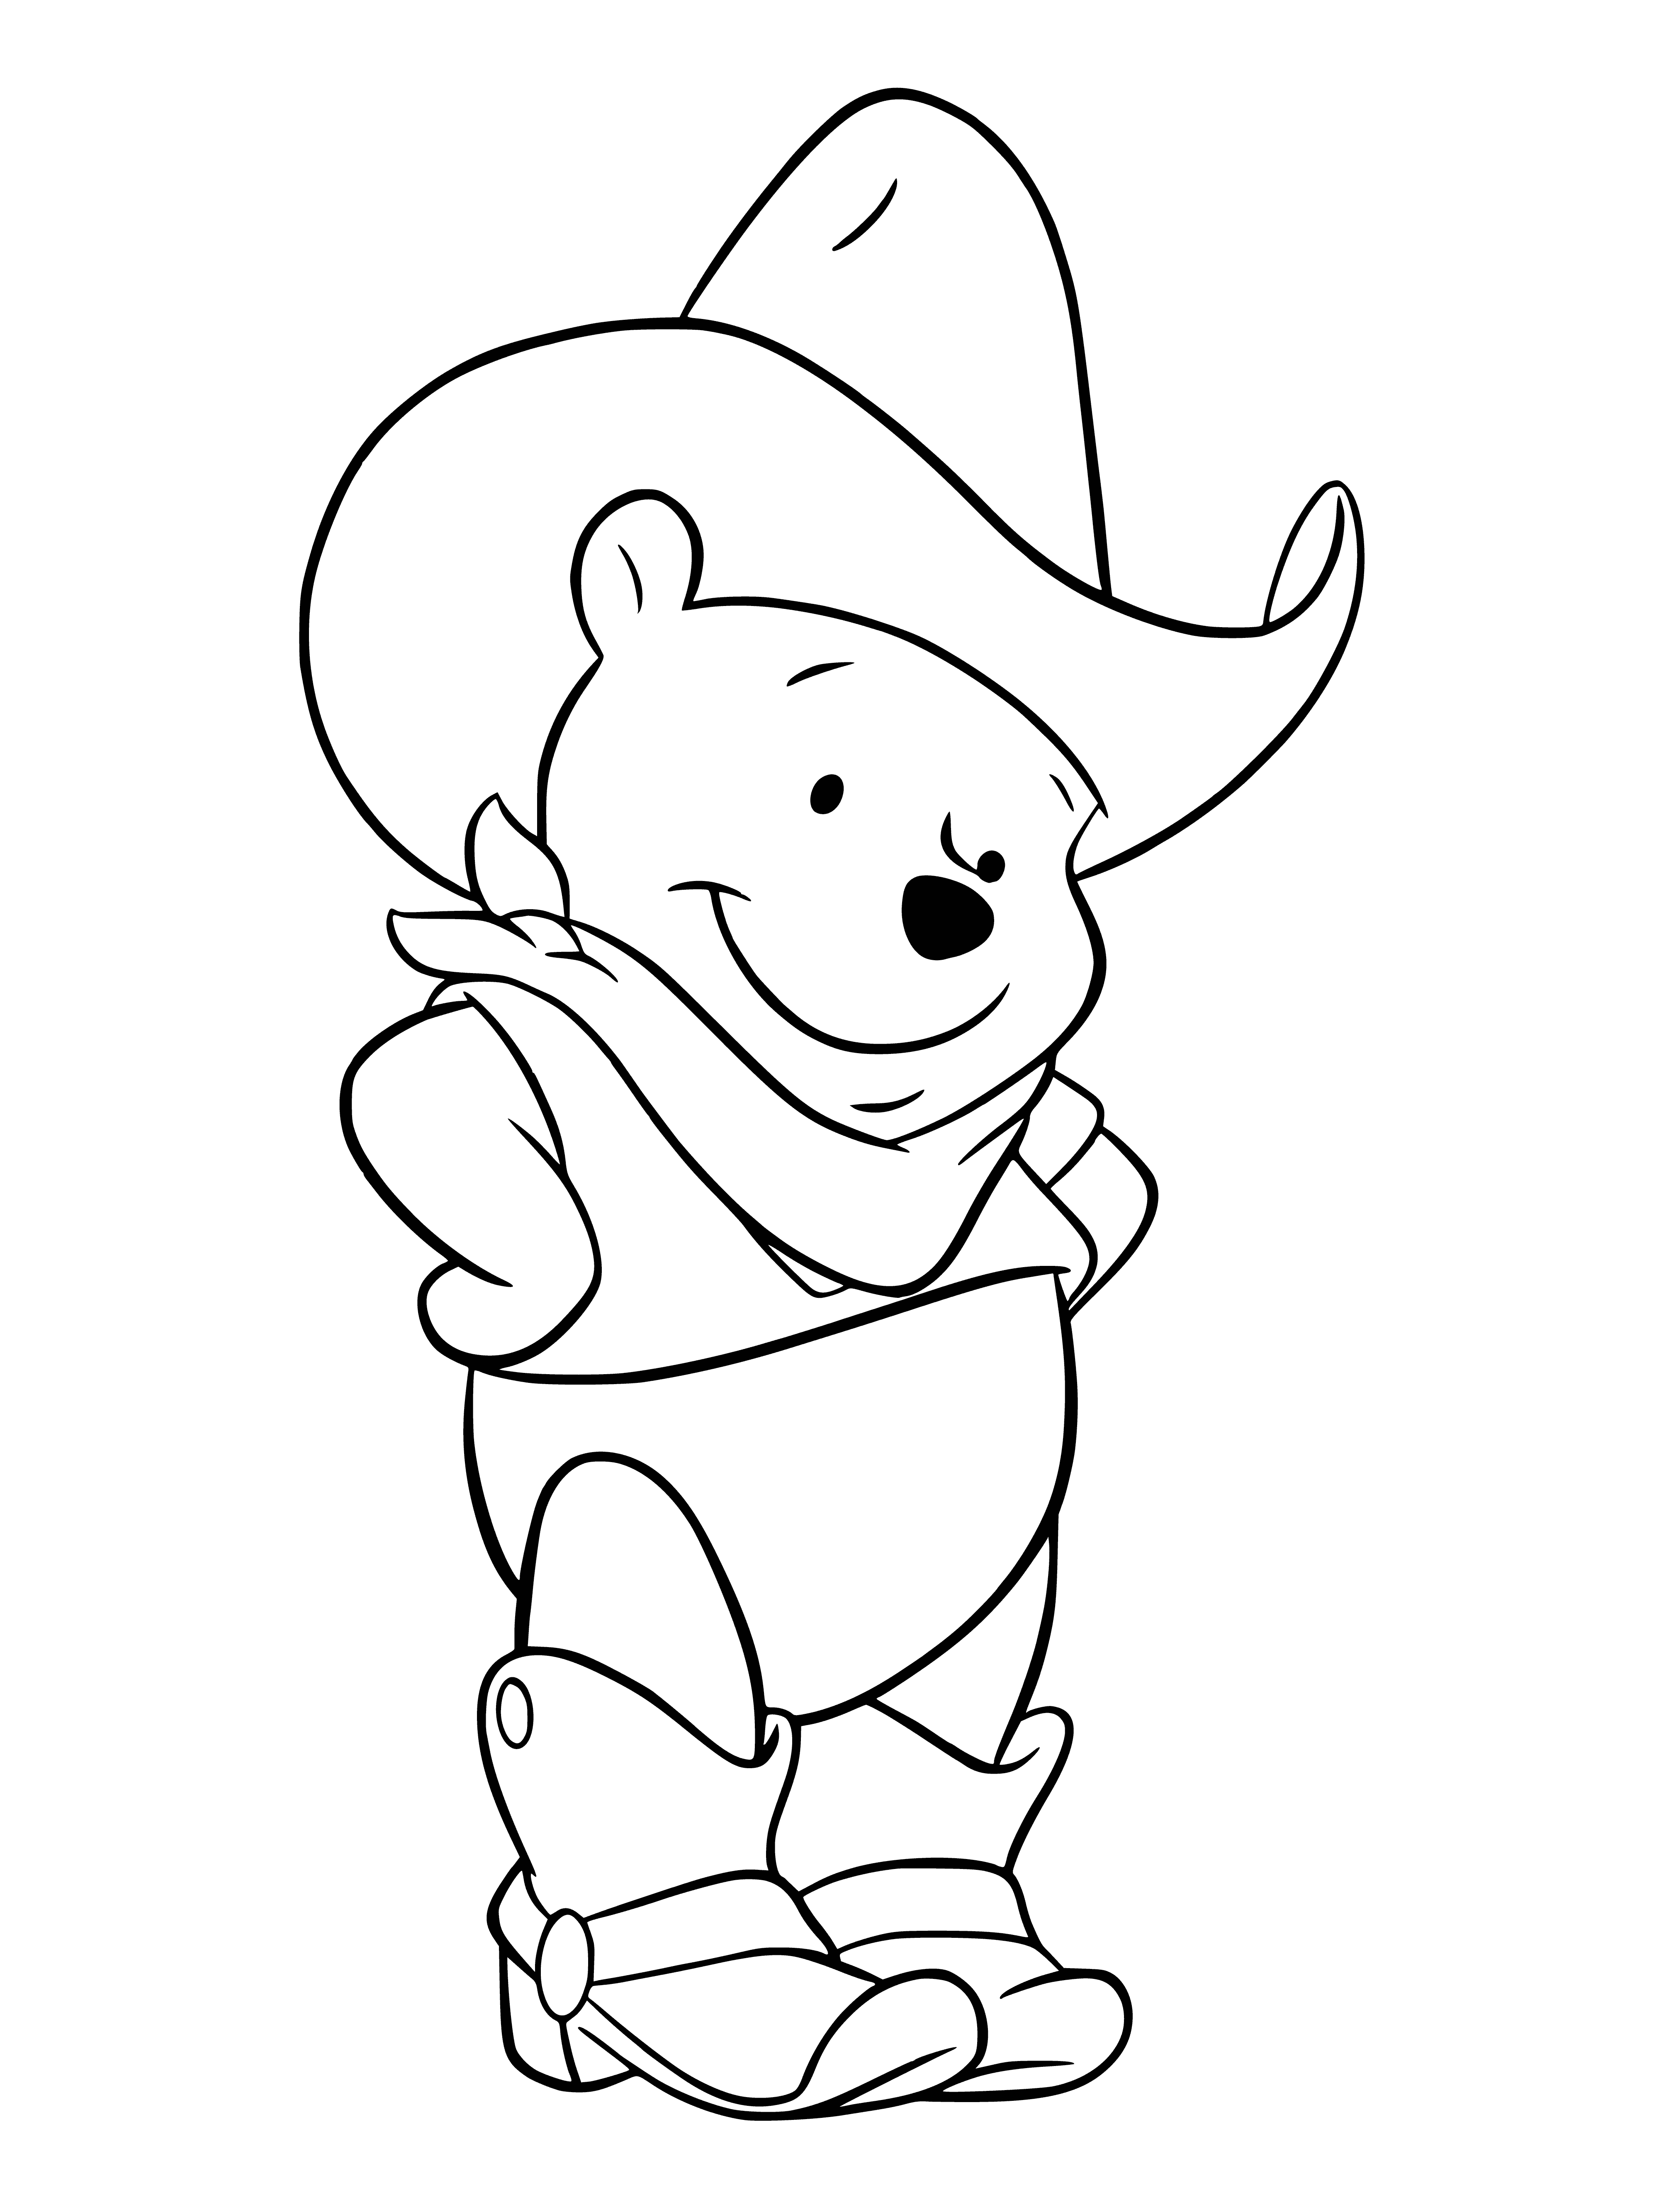 coloring page: Cowboy in brown hat and red and white shirt has gun holstered in brown belt. He wears blue jeans, brown boots and yellow bandanna. Yeehaw!